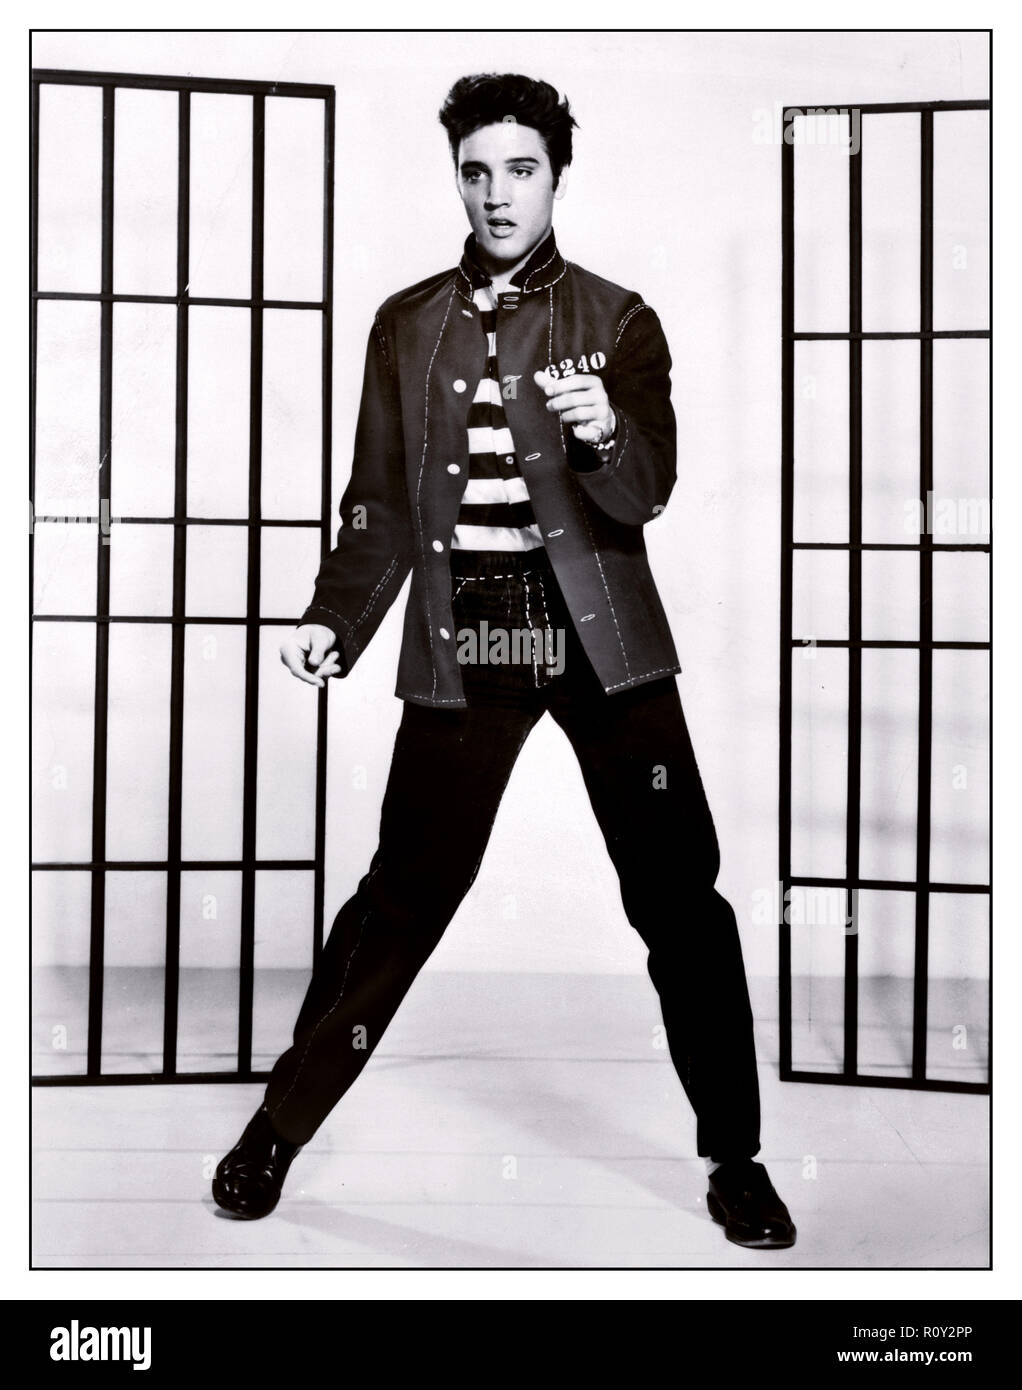 Elvis Presley film still from the iconic seminal Movie & Song 'Jailhouse Rock' 1957 The song Lyrics start... 'Warden threw a party in the county Jail' Stock Photo